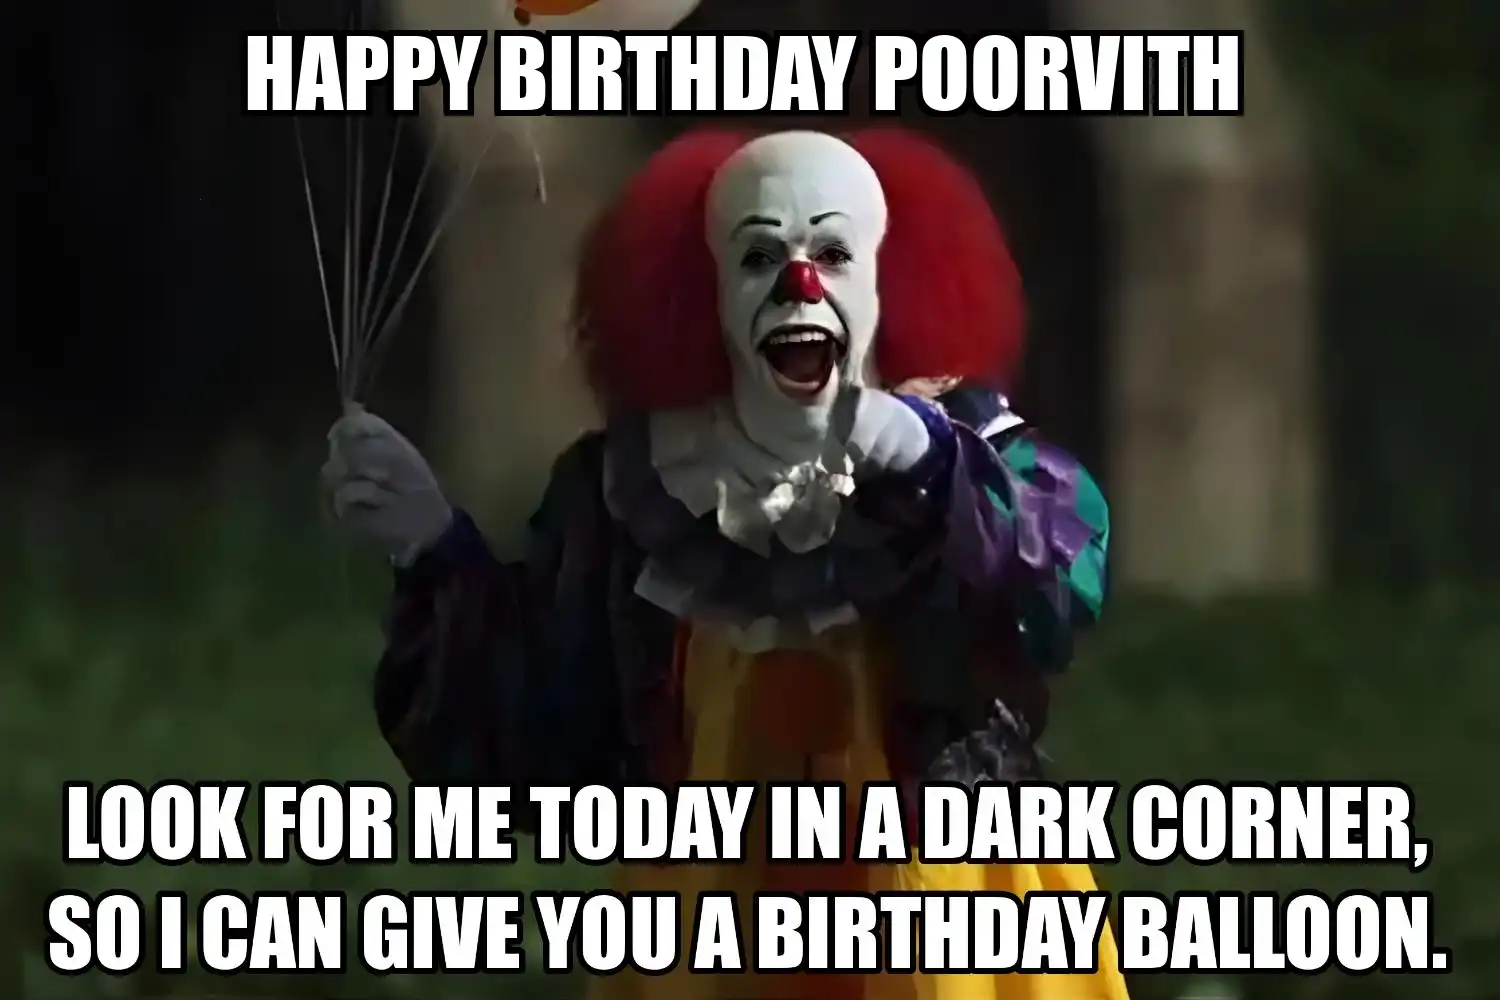 Happy Birthday Poorvith I Can Give You A Balloon Meme